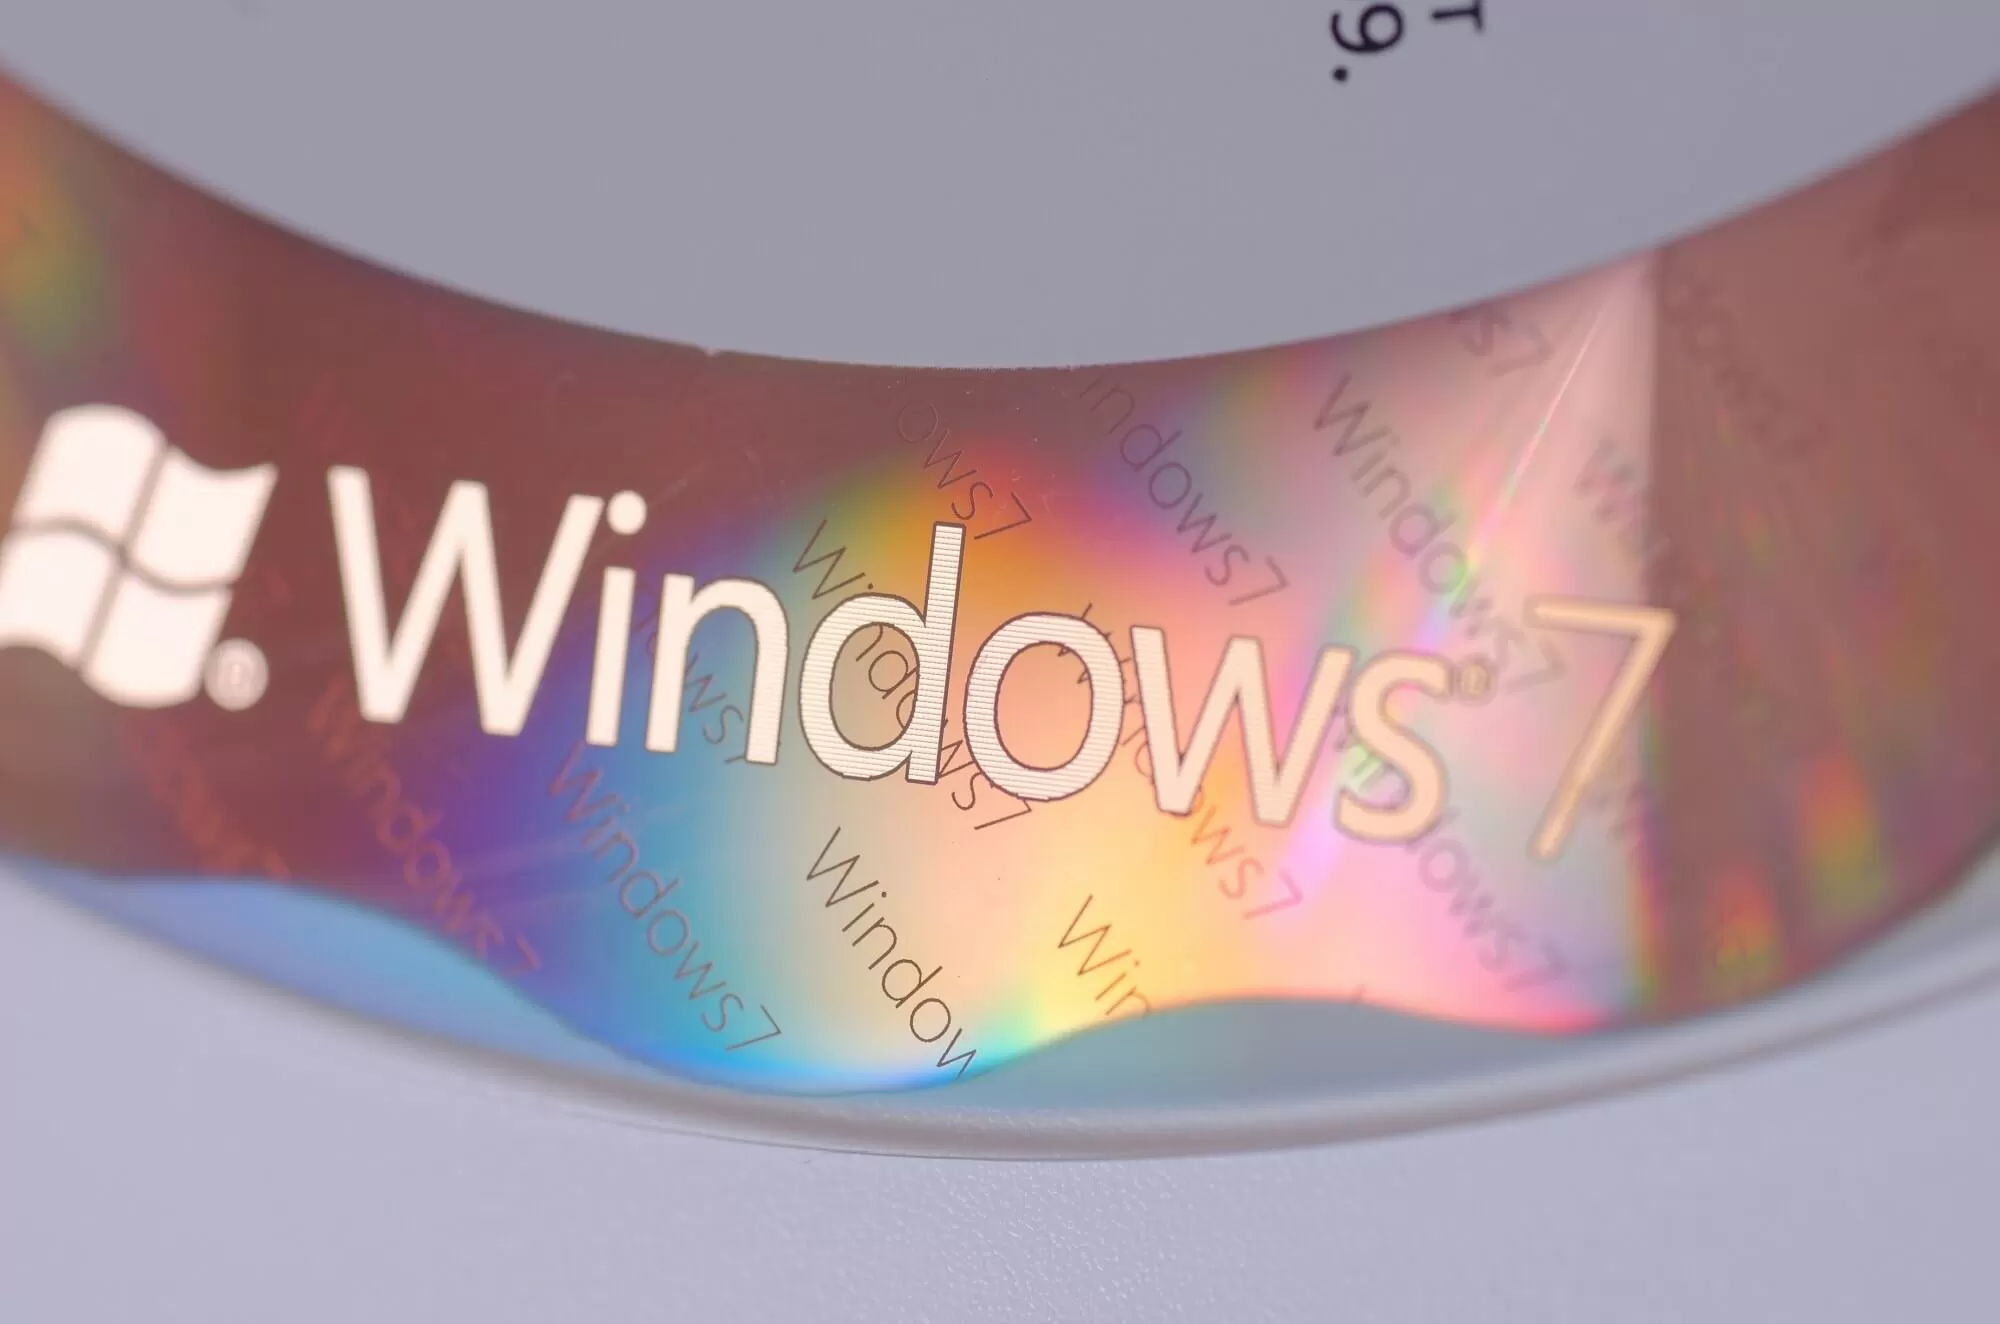 Windows 7 users won't let go of the aging OS